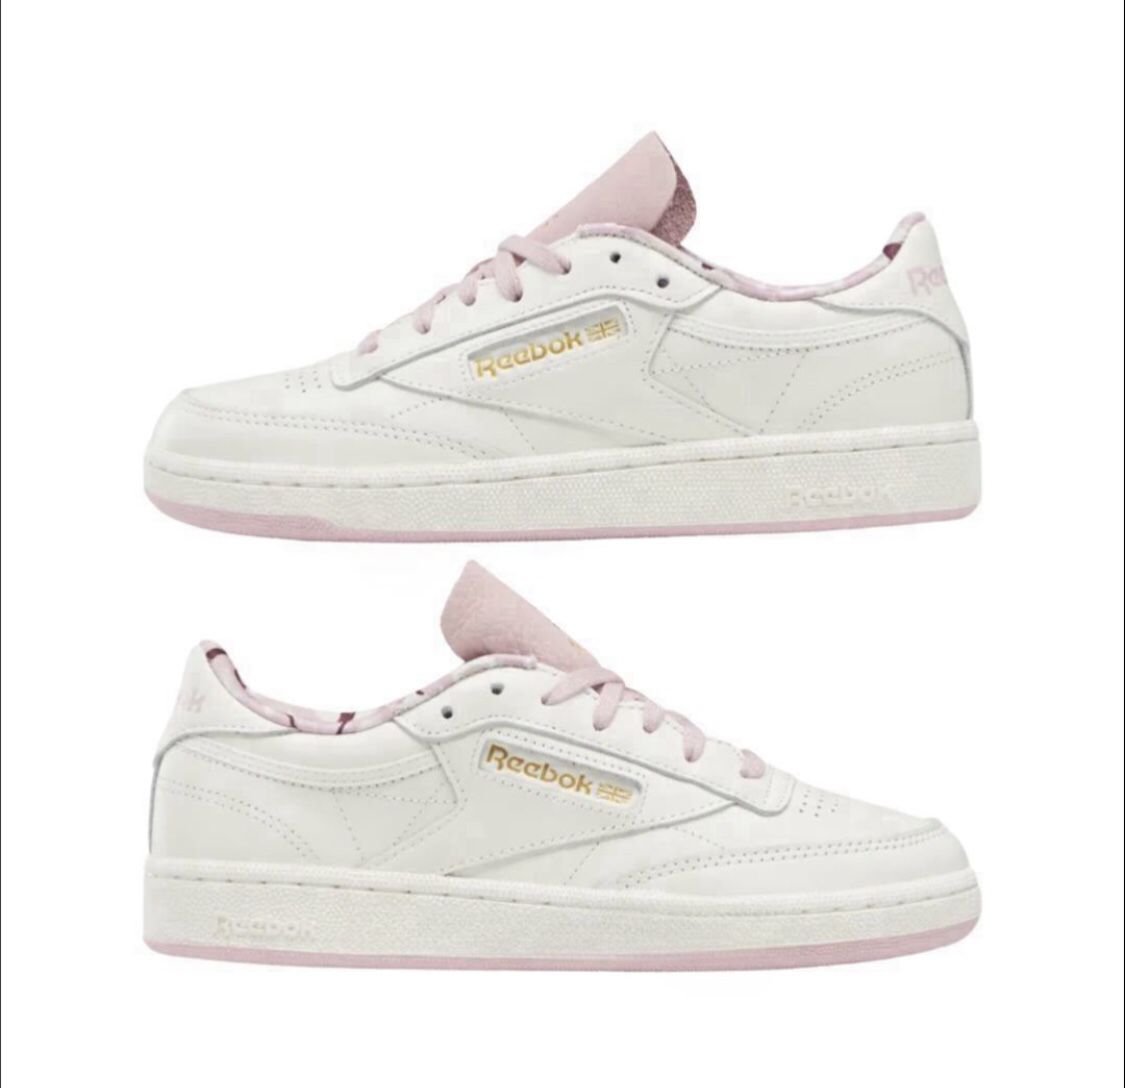 NWT REEBOK CLUB C 85 WOMEN'S CLASSIC LEATHER SNEAKERS SIZE 8.5 RETAIL $75 